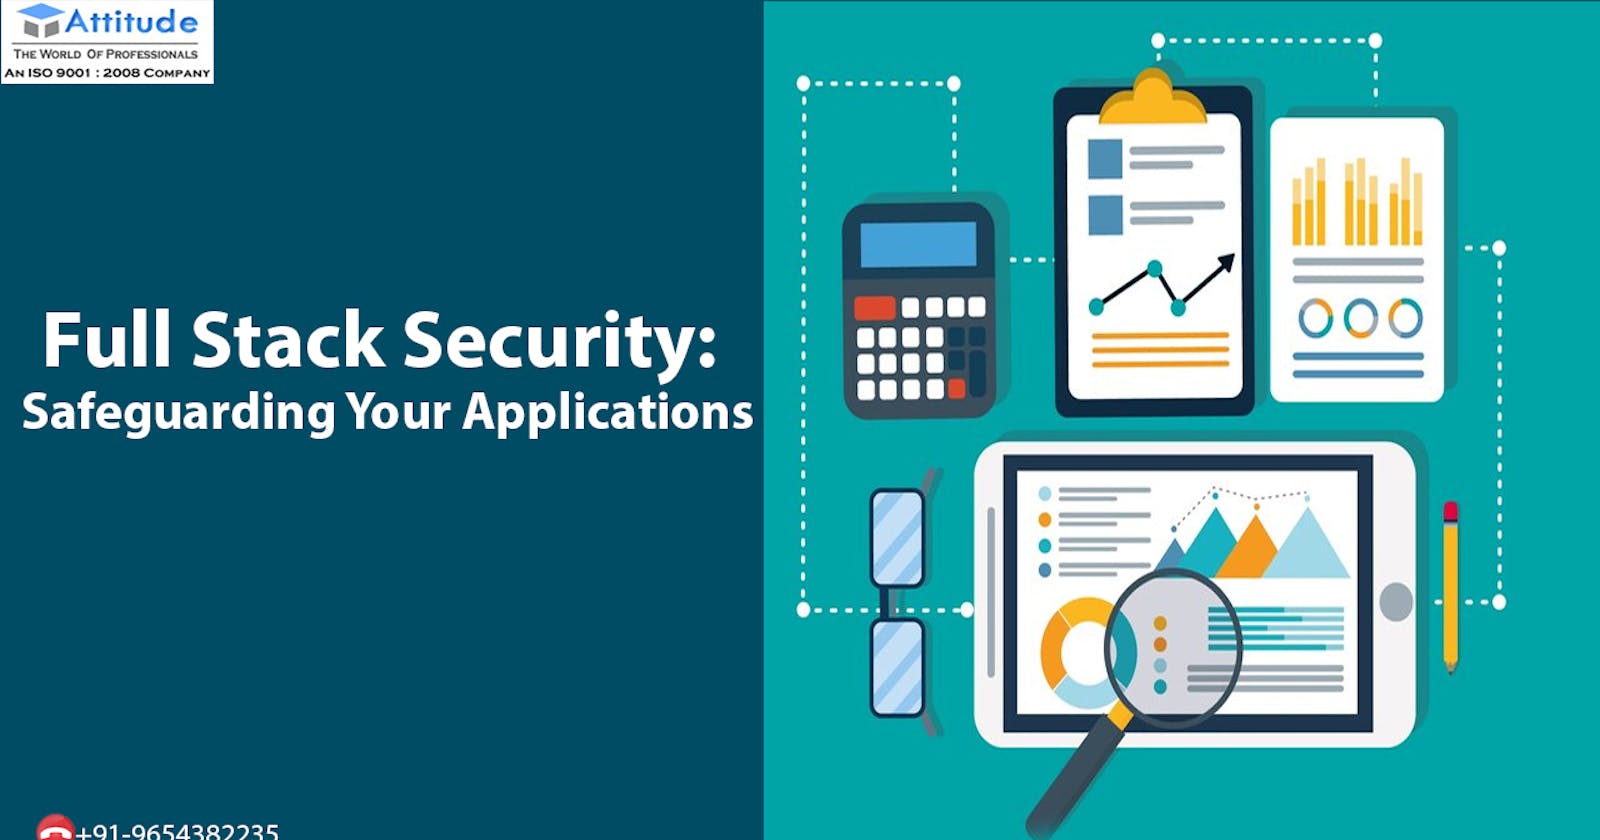 Full Stack Security: Safeguarding Your Applications